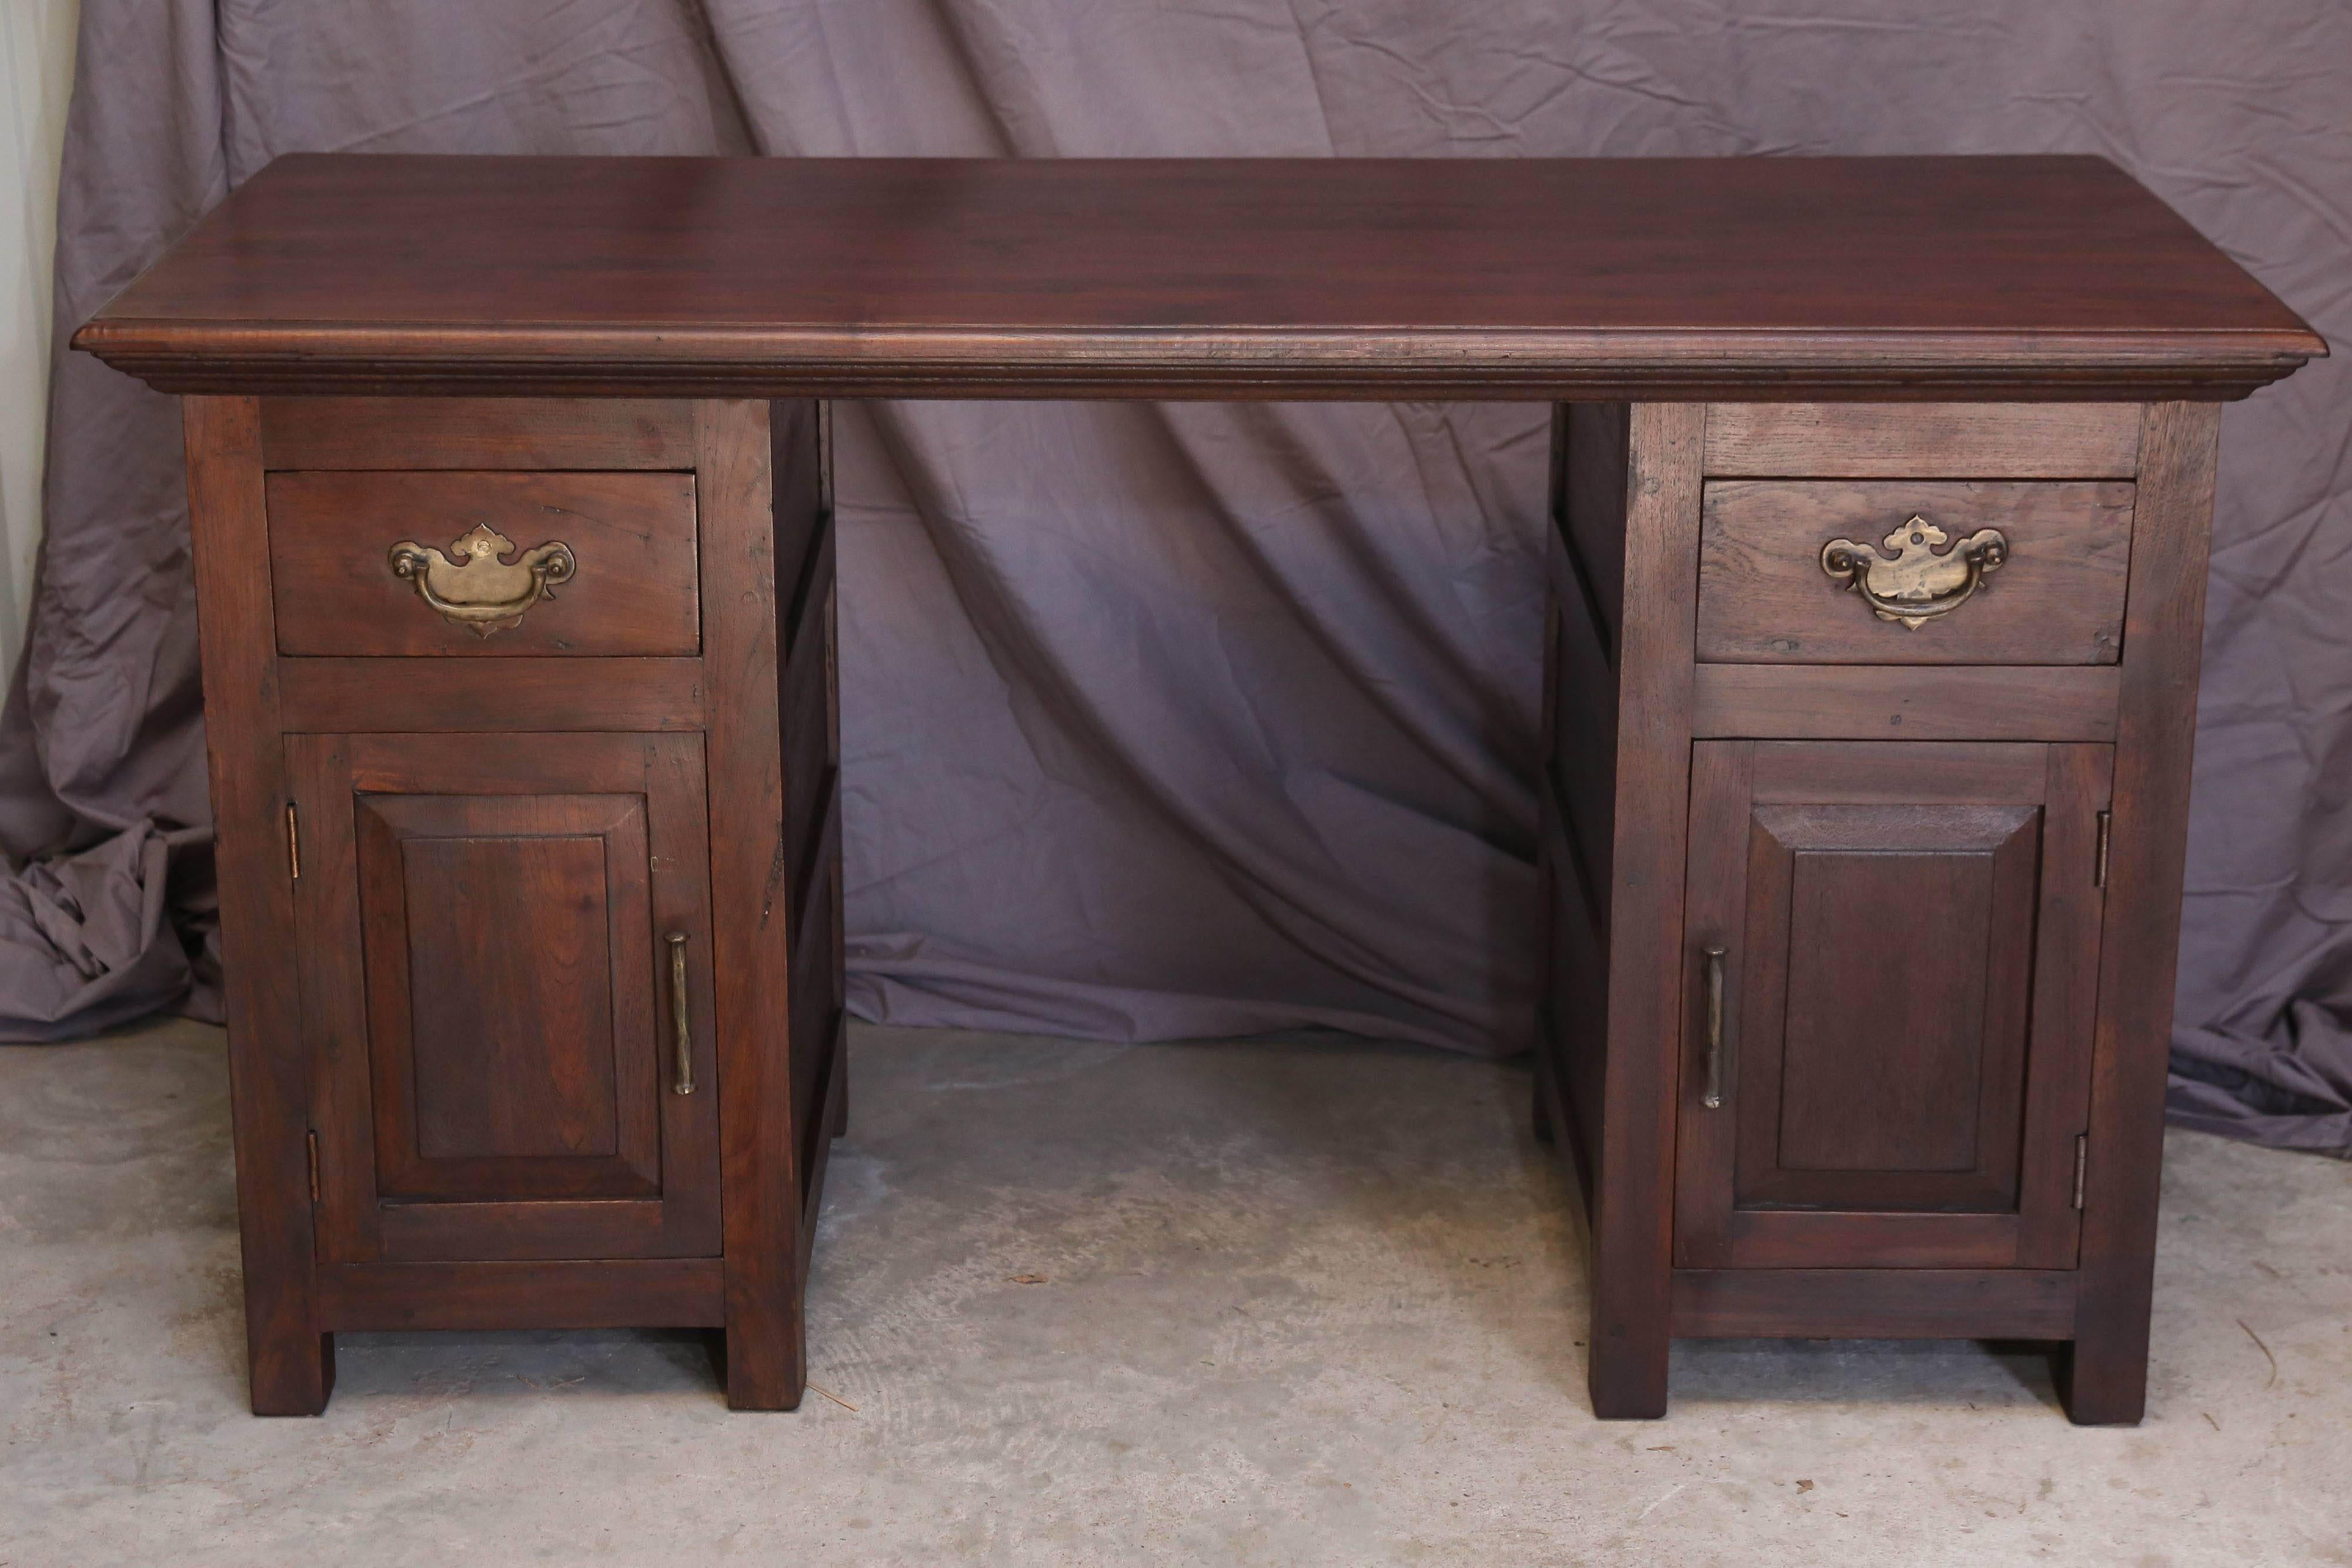 This desk is made up of three parts. Made of solid teak wood in the 1920s. Specially made for European ladies who worked in the coffee plantations in the Gallee district of Sri Lanka. Crafted in old world carpentry
with two upper drawers and two